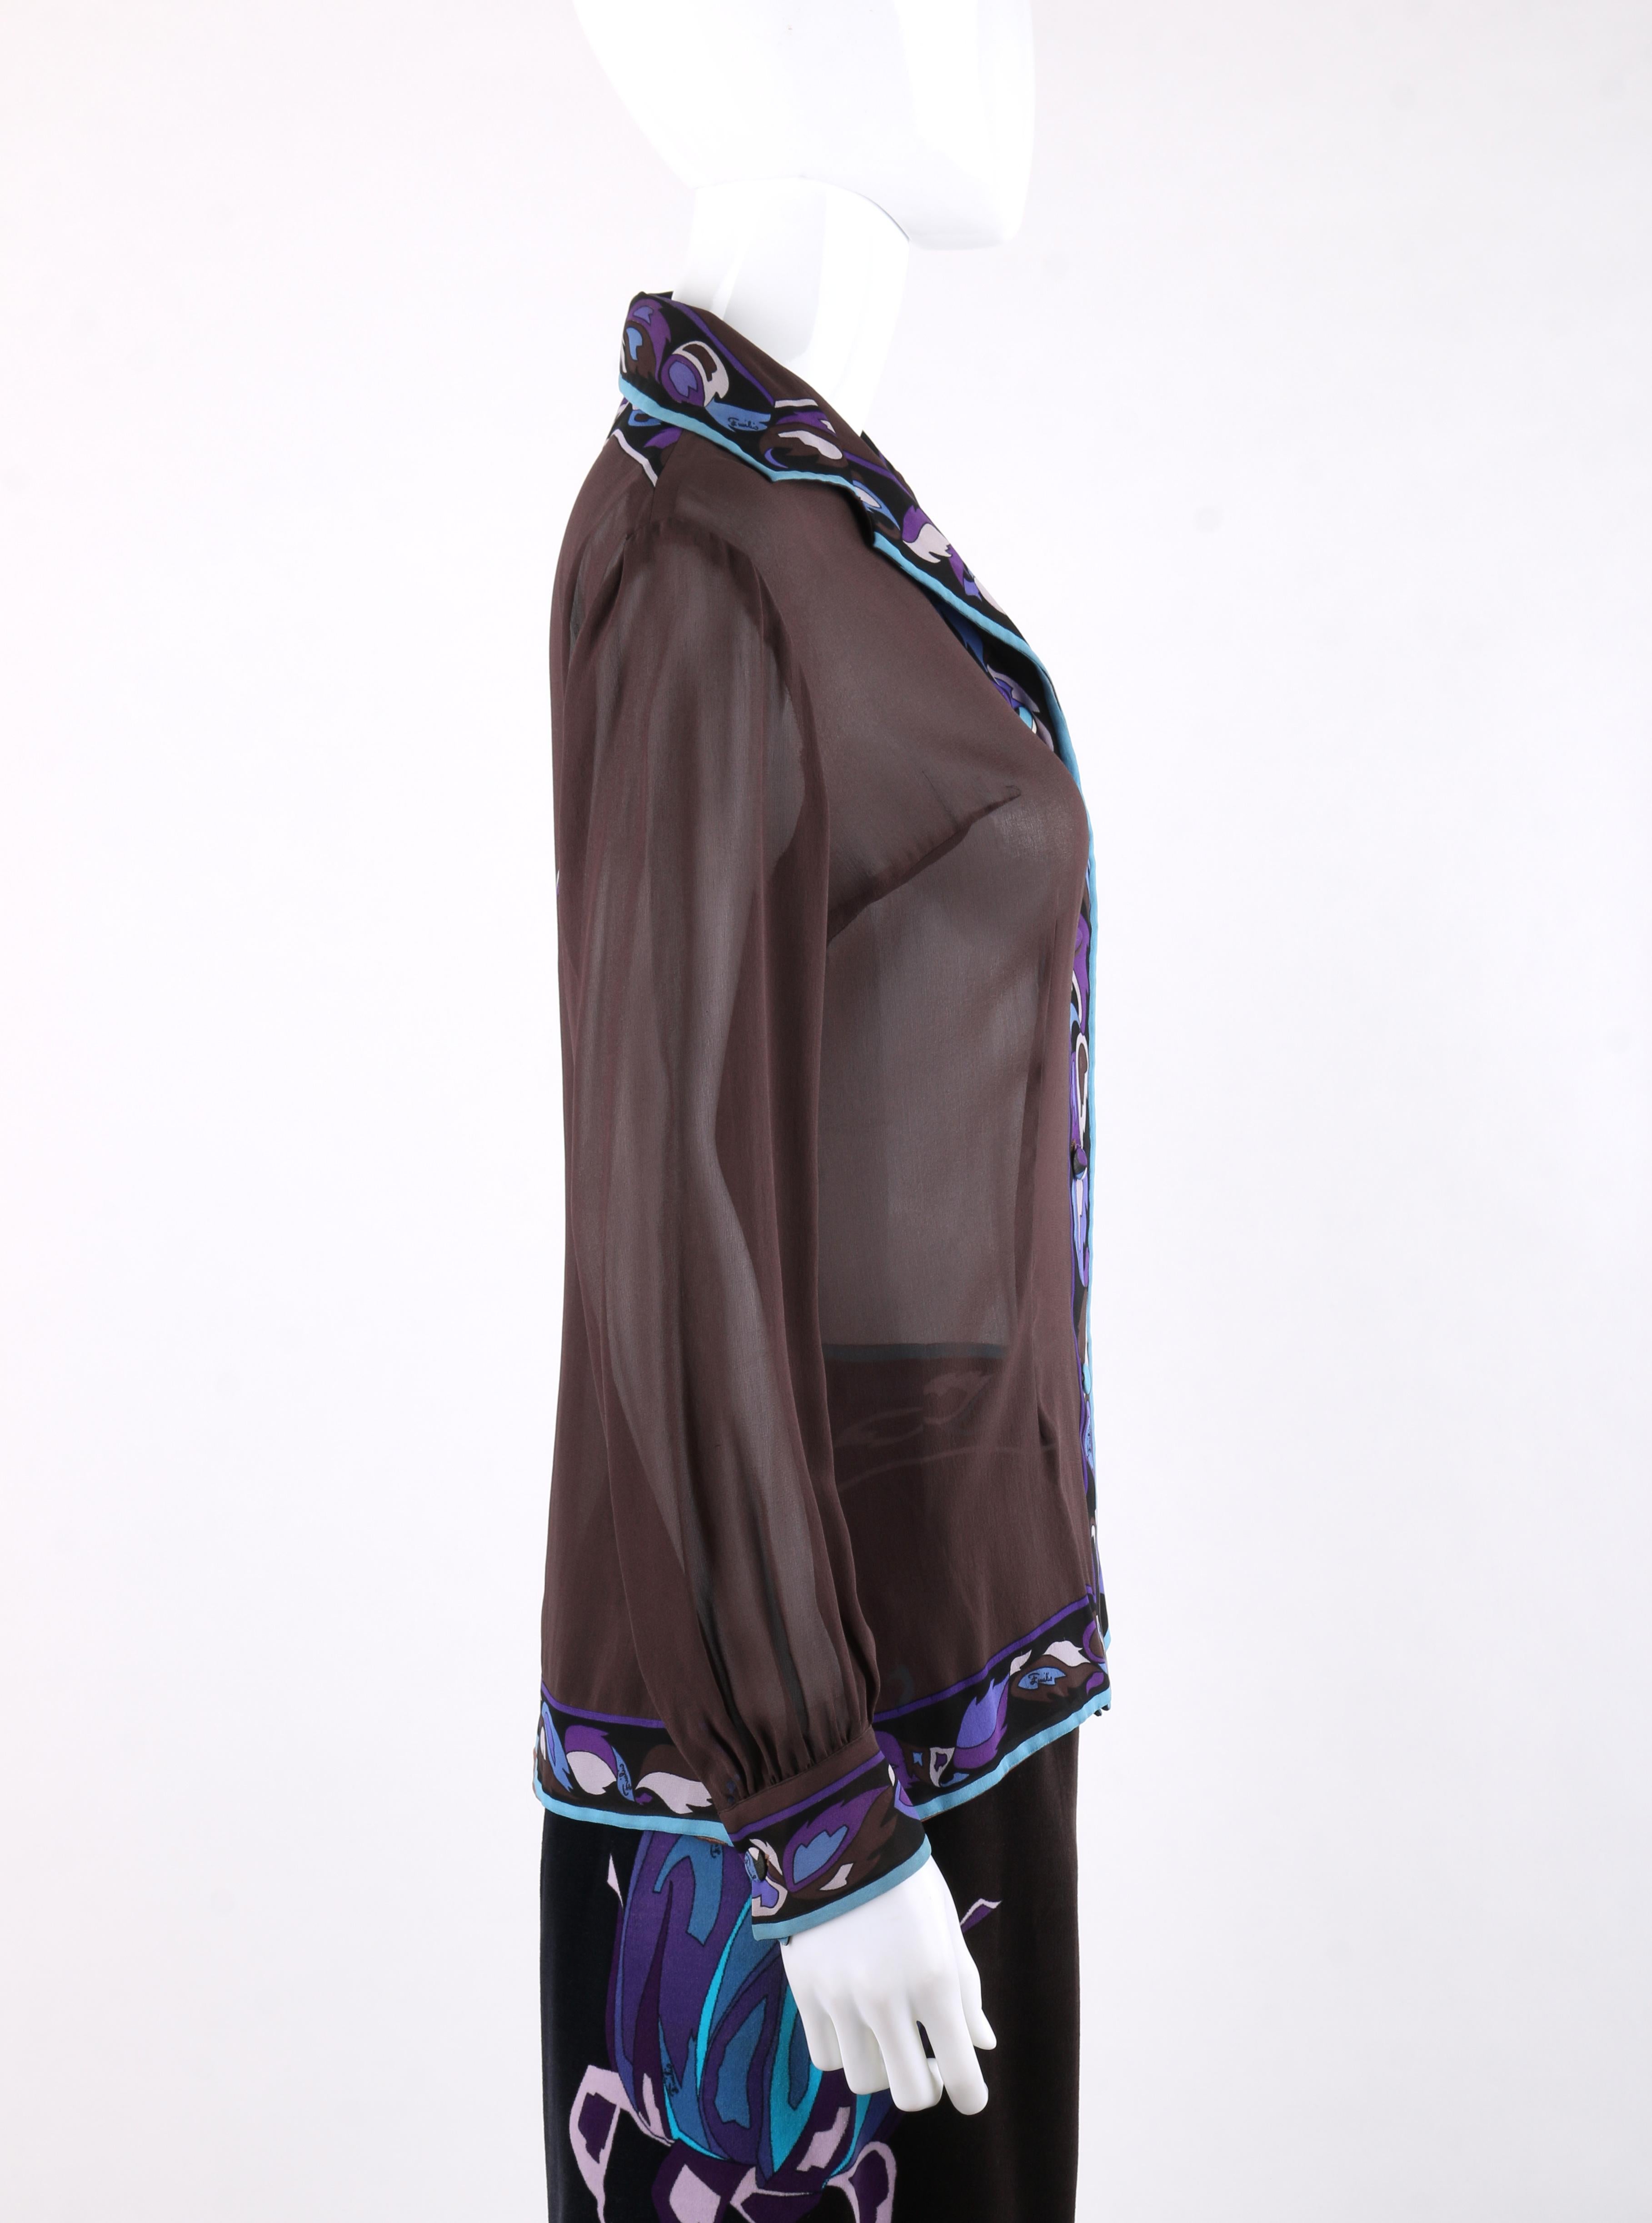 EMILIO PUCCI c.1960-70’s 2pc Multicolor Rose Silk Velvet Blouse Pant Set In Good Condition For Sale In Thiensville, WI